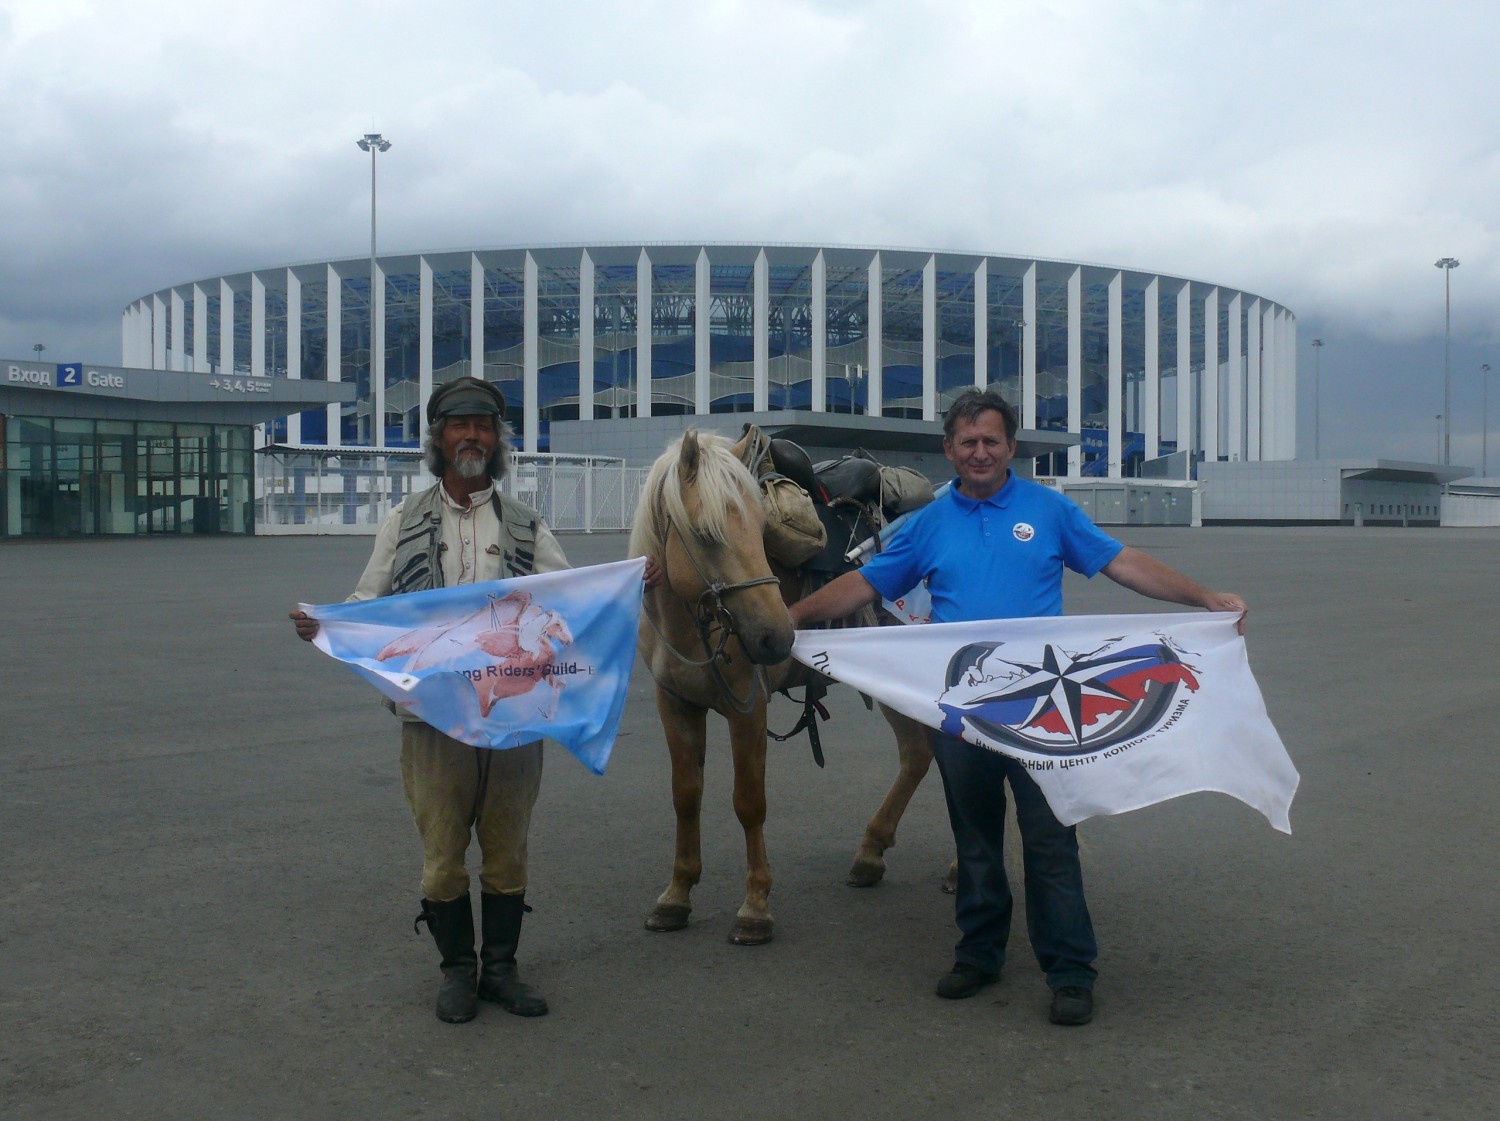 Jing Li received the flag of The Long Riders' Guild in Nizhny Novgorod Russia